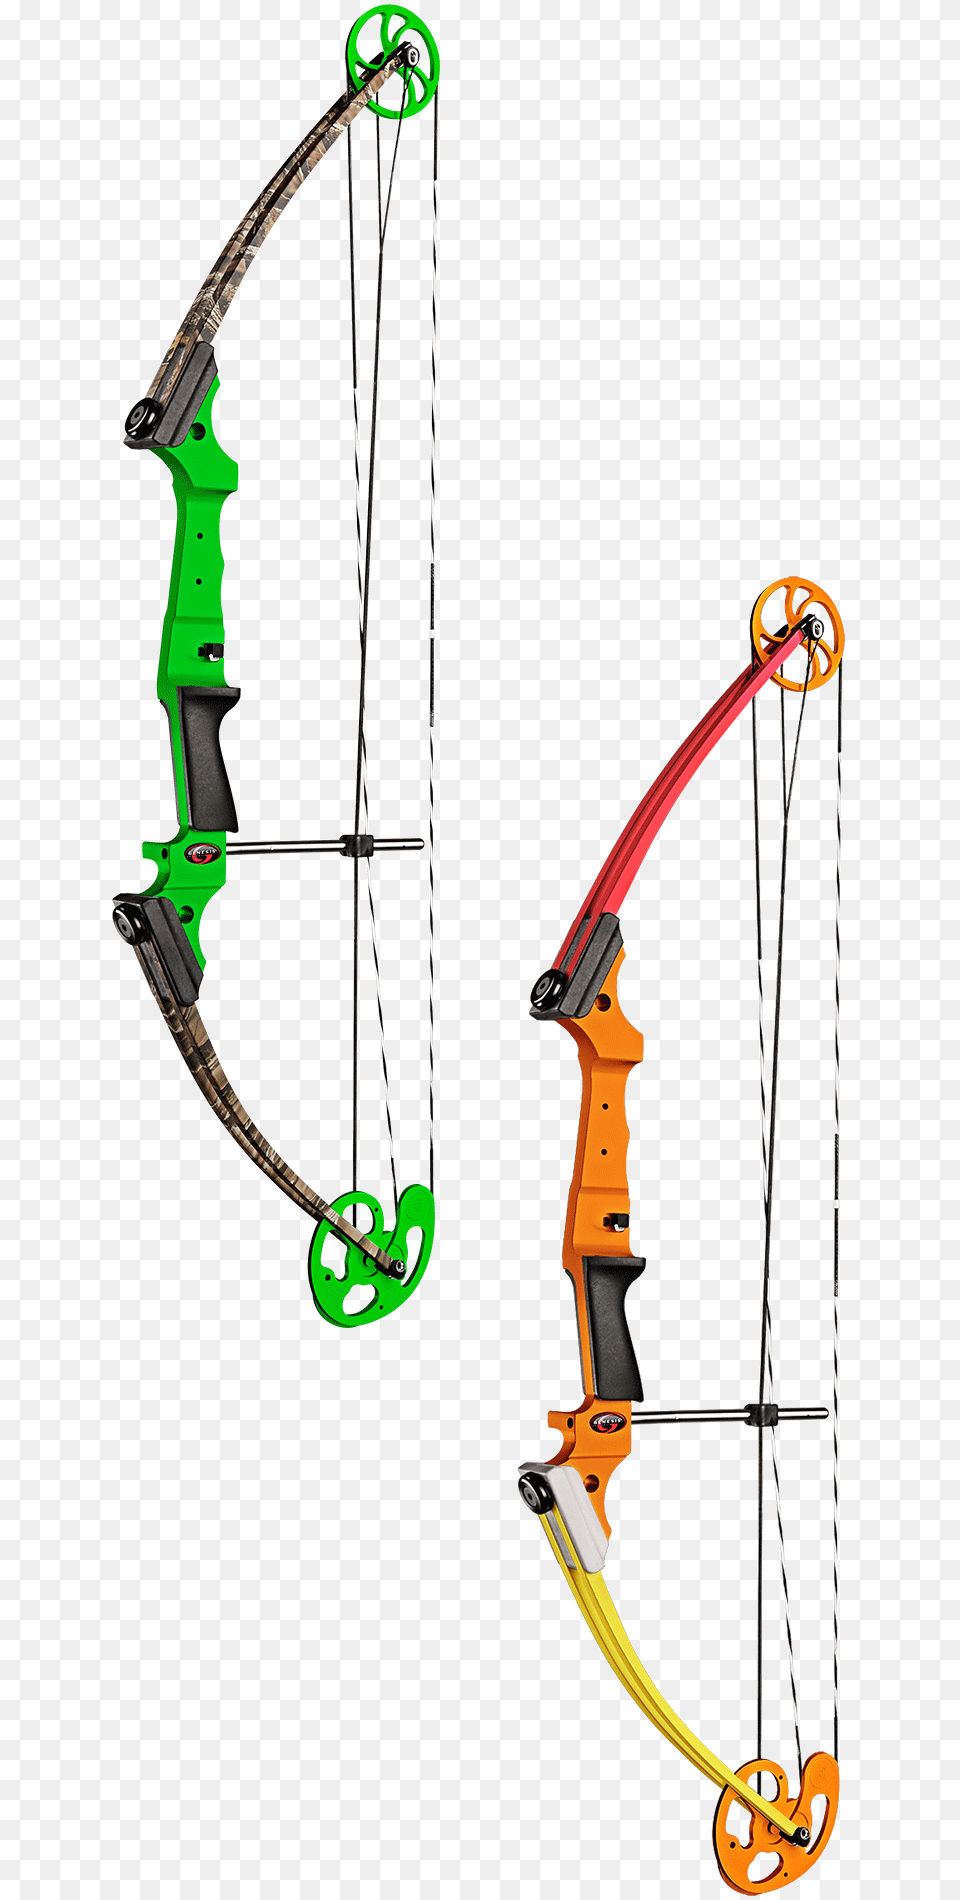 Home Genesis Bow, Weapon, Archery, Sport Png